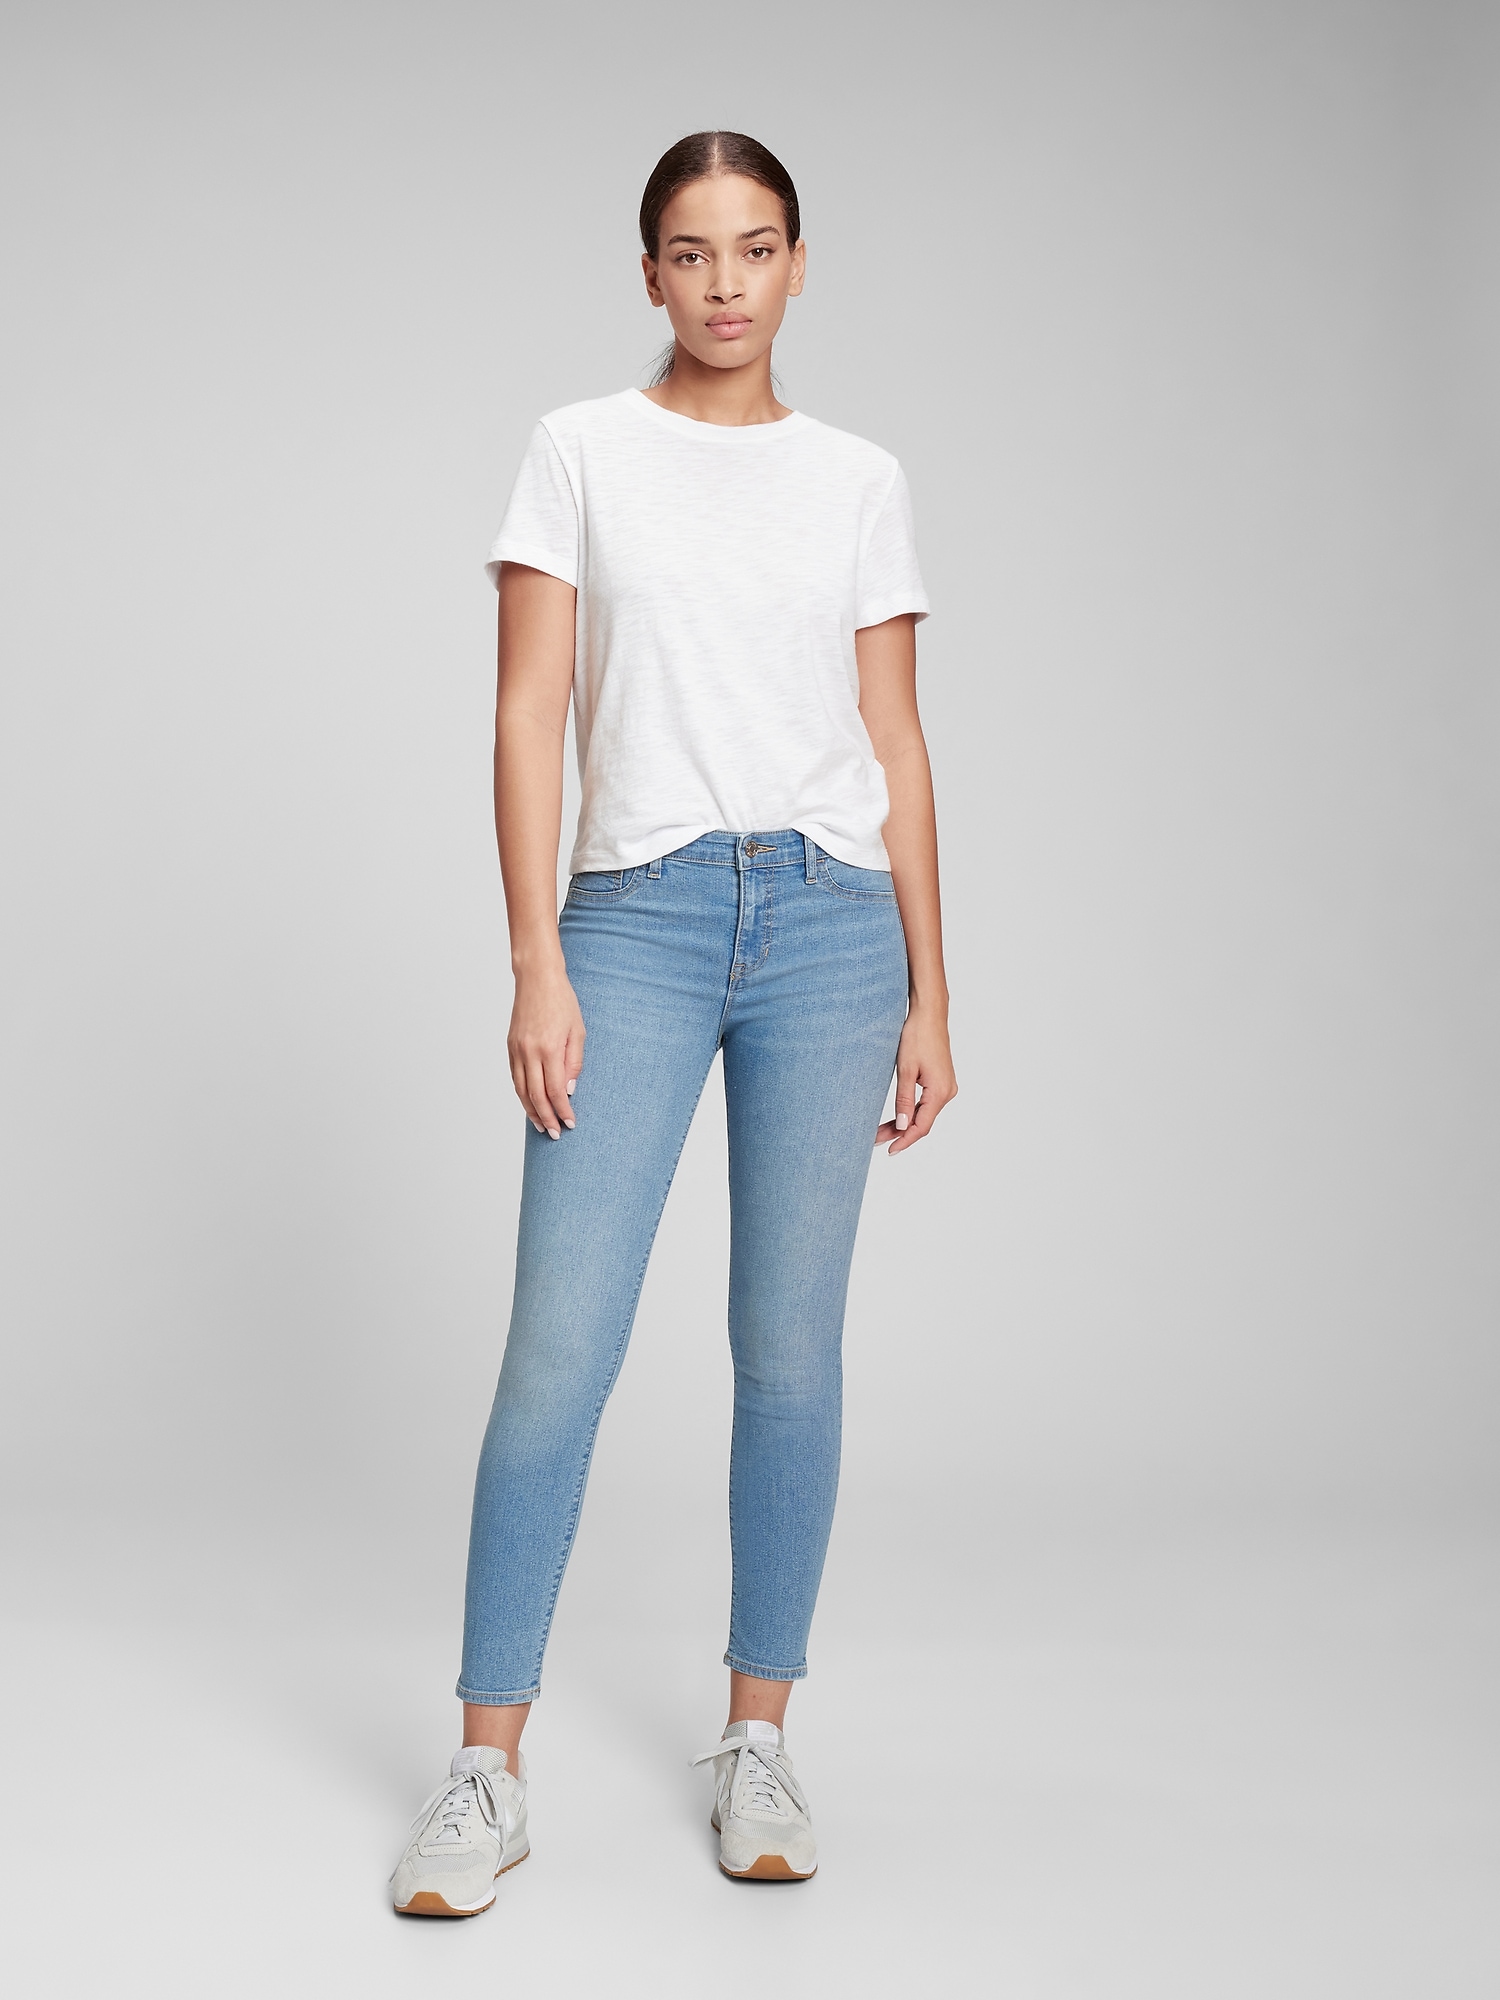 Gap Solid Blue Jeggings Size 12 (Tall) - 66% off